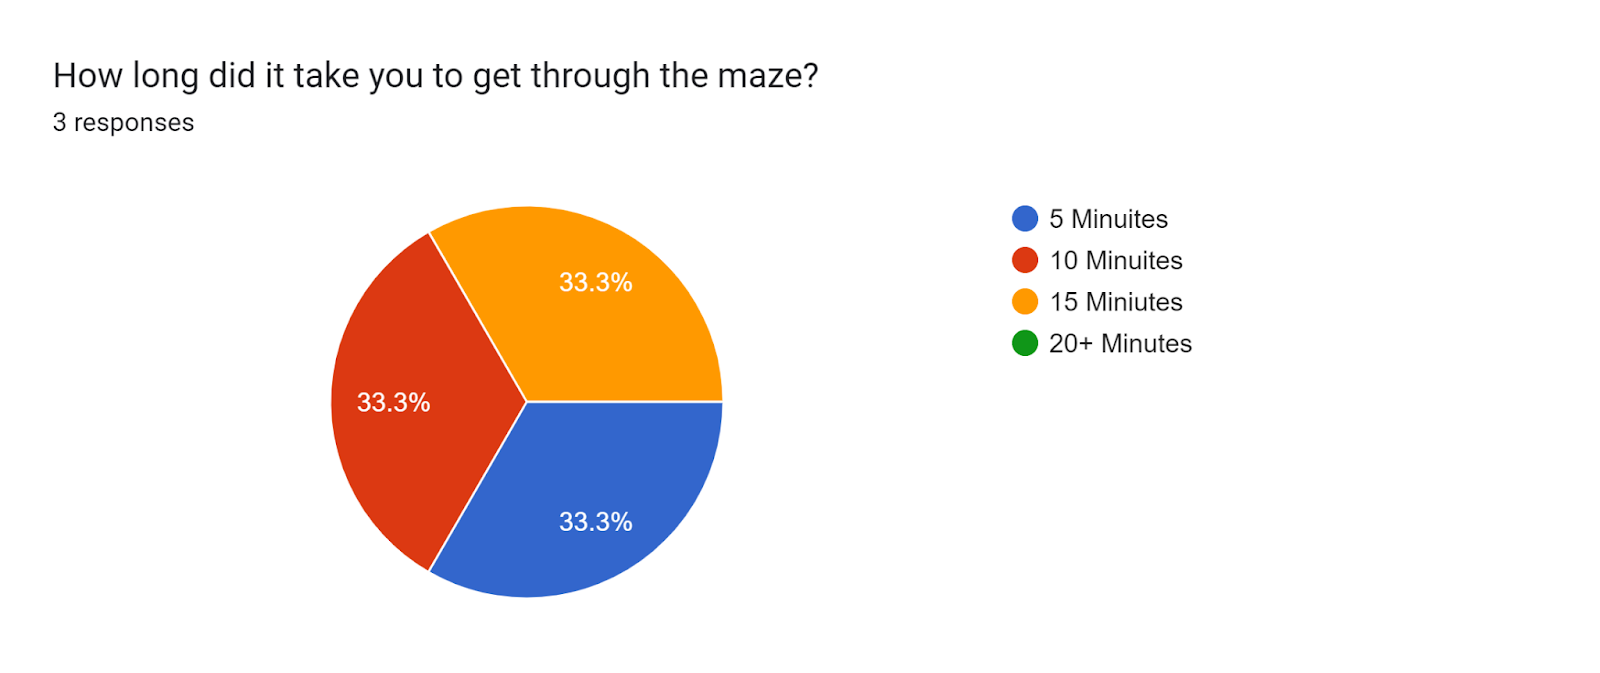 Forms response chart. Question title: How long did it take you to get through the maze?. Number of responses: 3 responses.